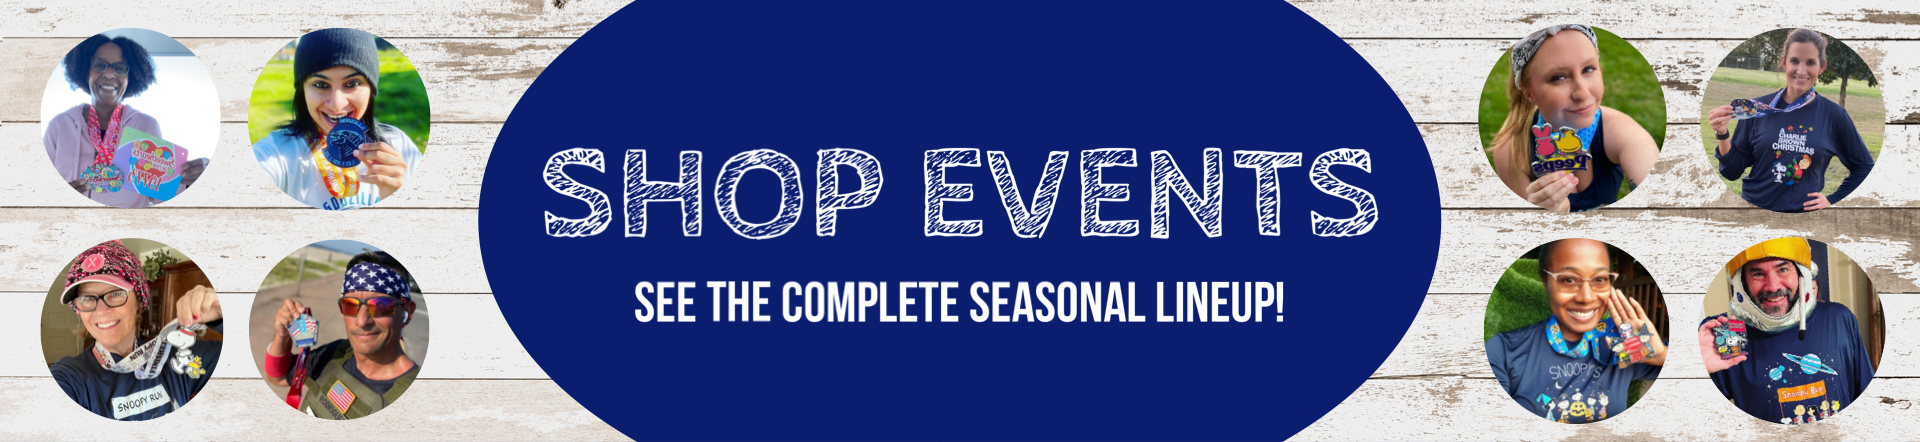 Shop Events - see the complete seasonal lineup